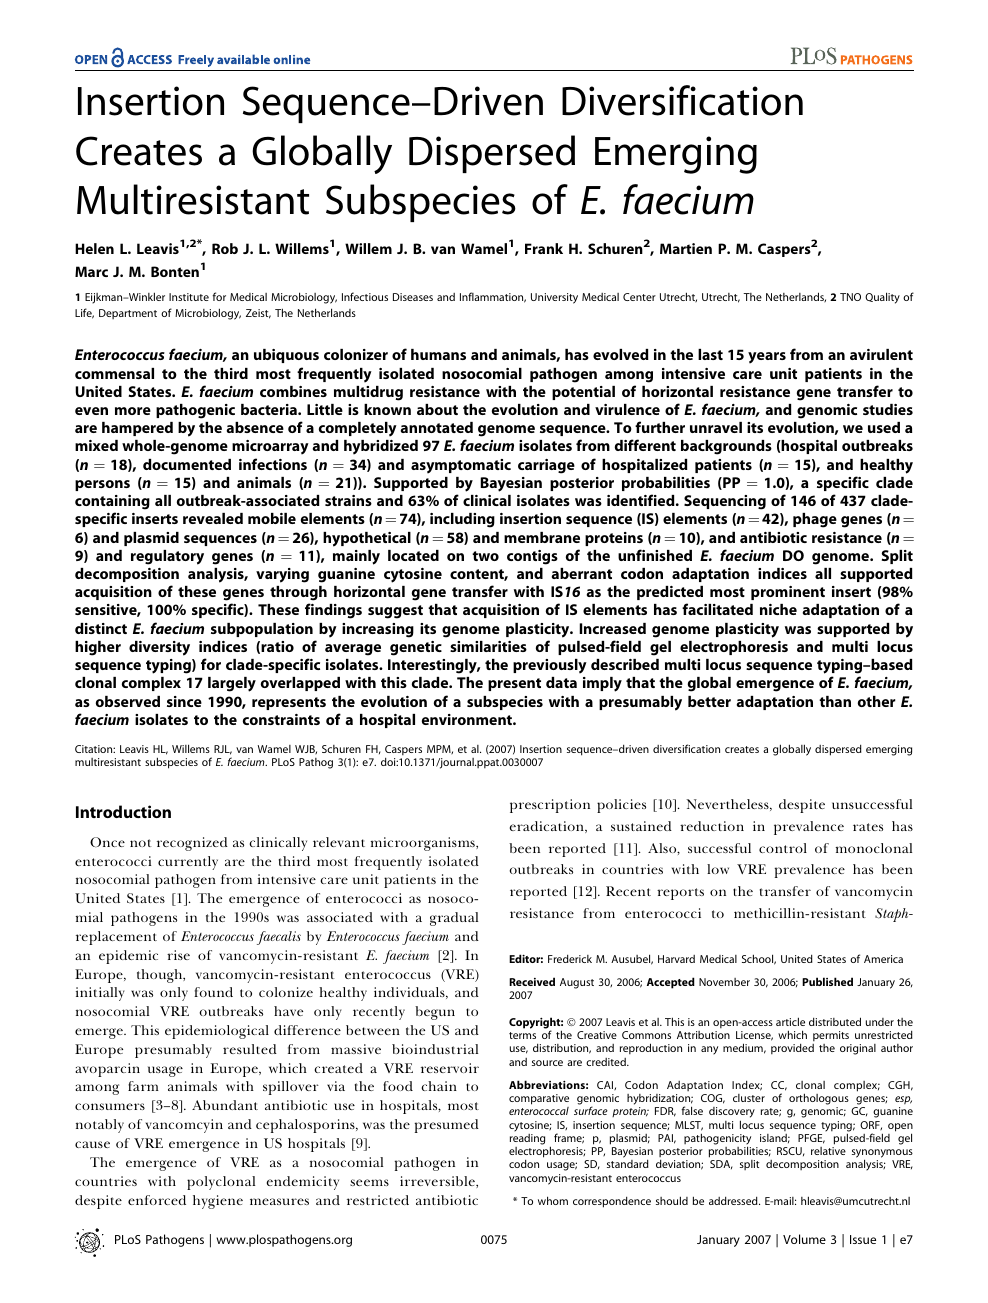 Insertion Sequence Driven Diversification Creates A Globally Dispersed Emerging Multiresistant Subspecies Of E Faecium Topic Of Research Paper In Biological Sciences Download Scholarly Article Pdf And Read For Free On Cyberleninka Open